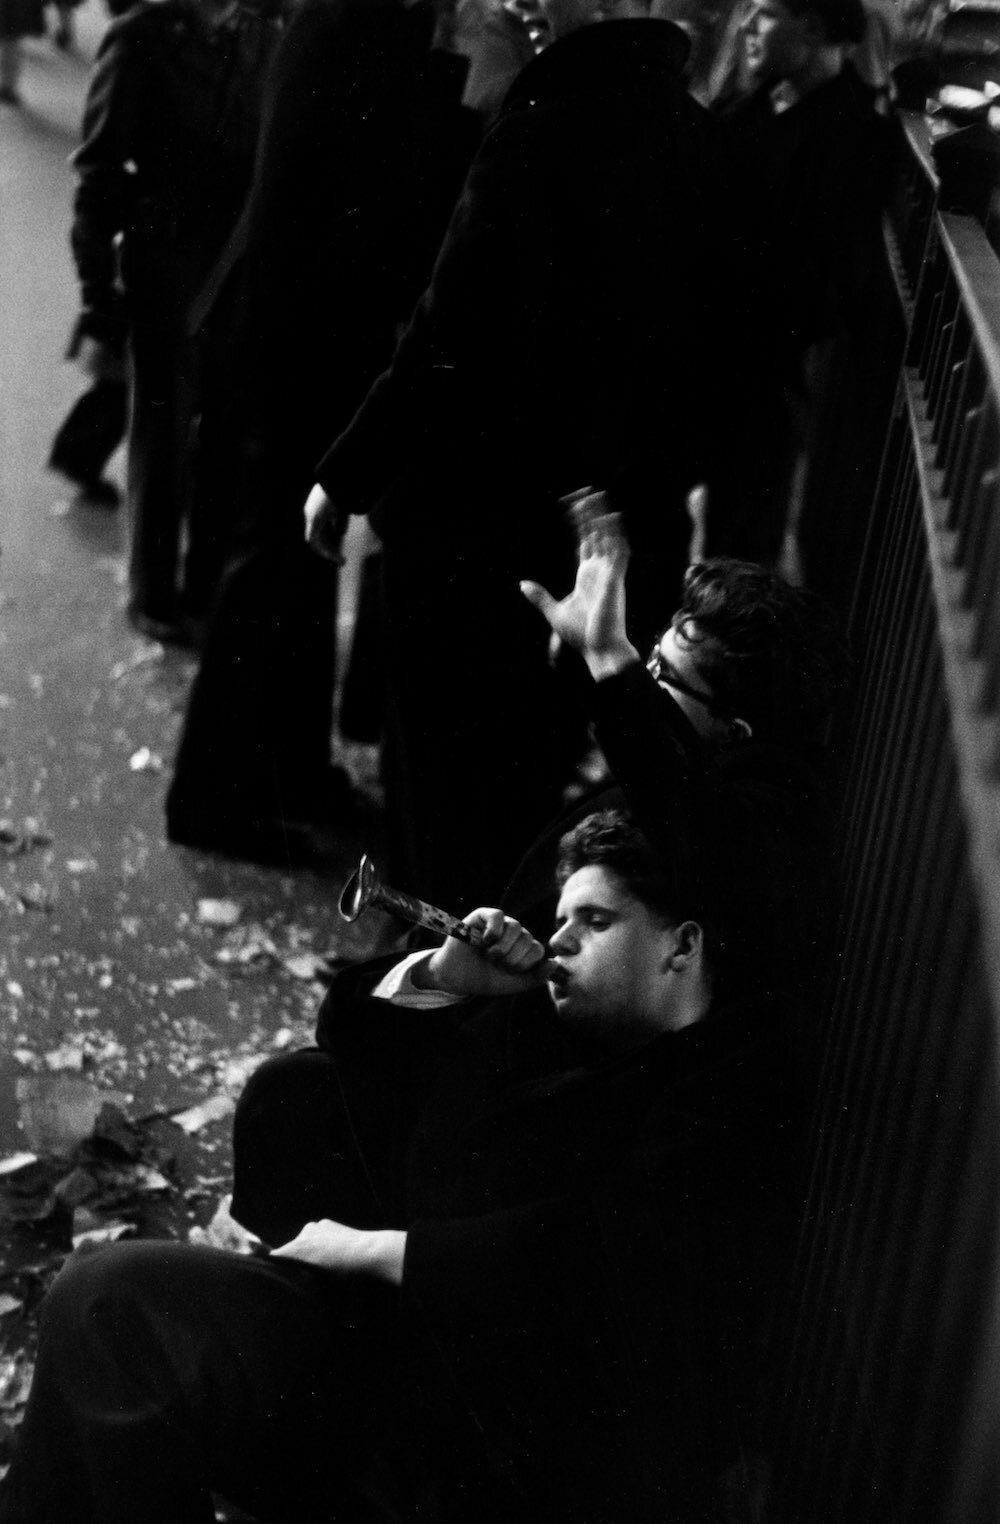 A Young Man Slumped Against Railings Blows On A Battered Toy Trumpet During New Year’s Celebrations In Times Square, New York.